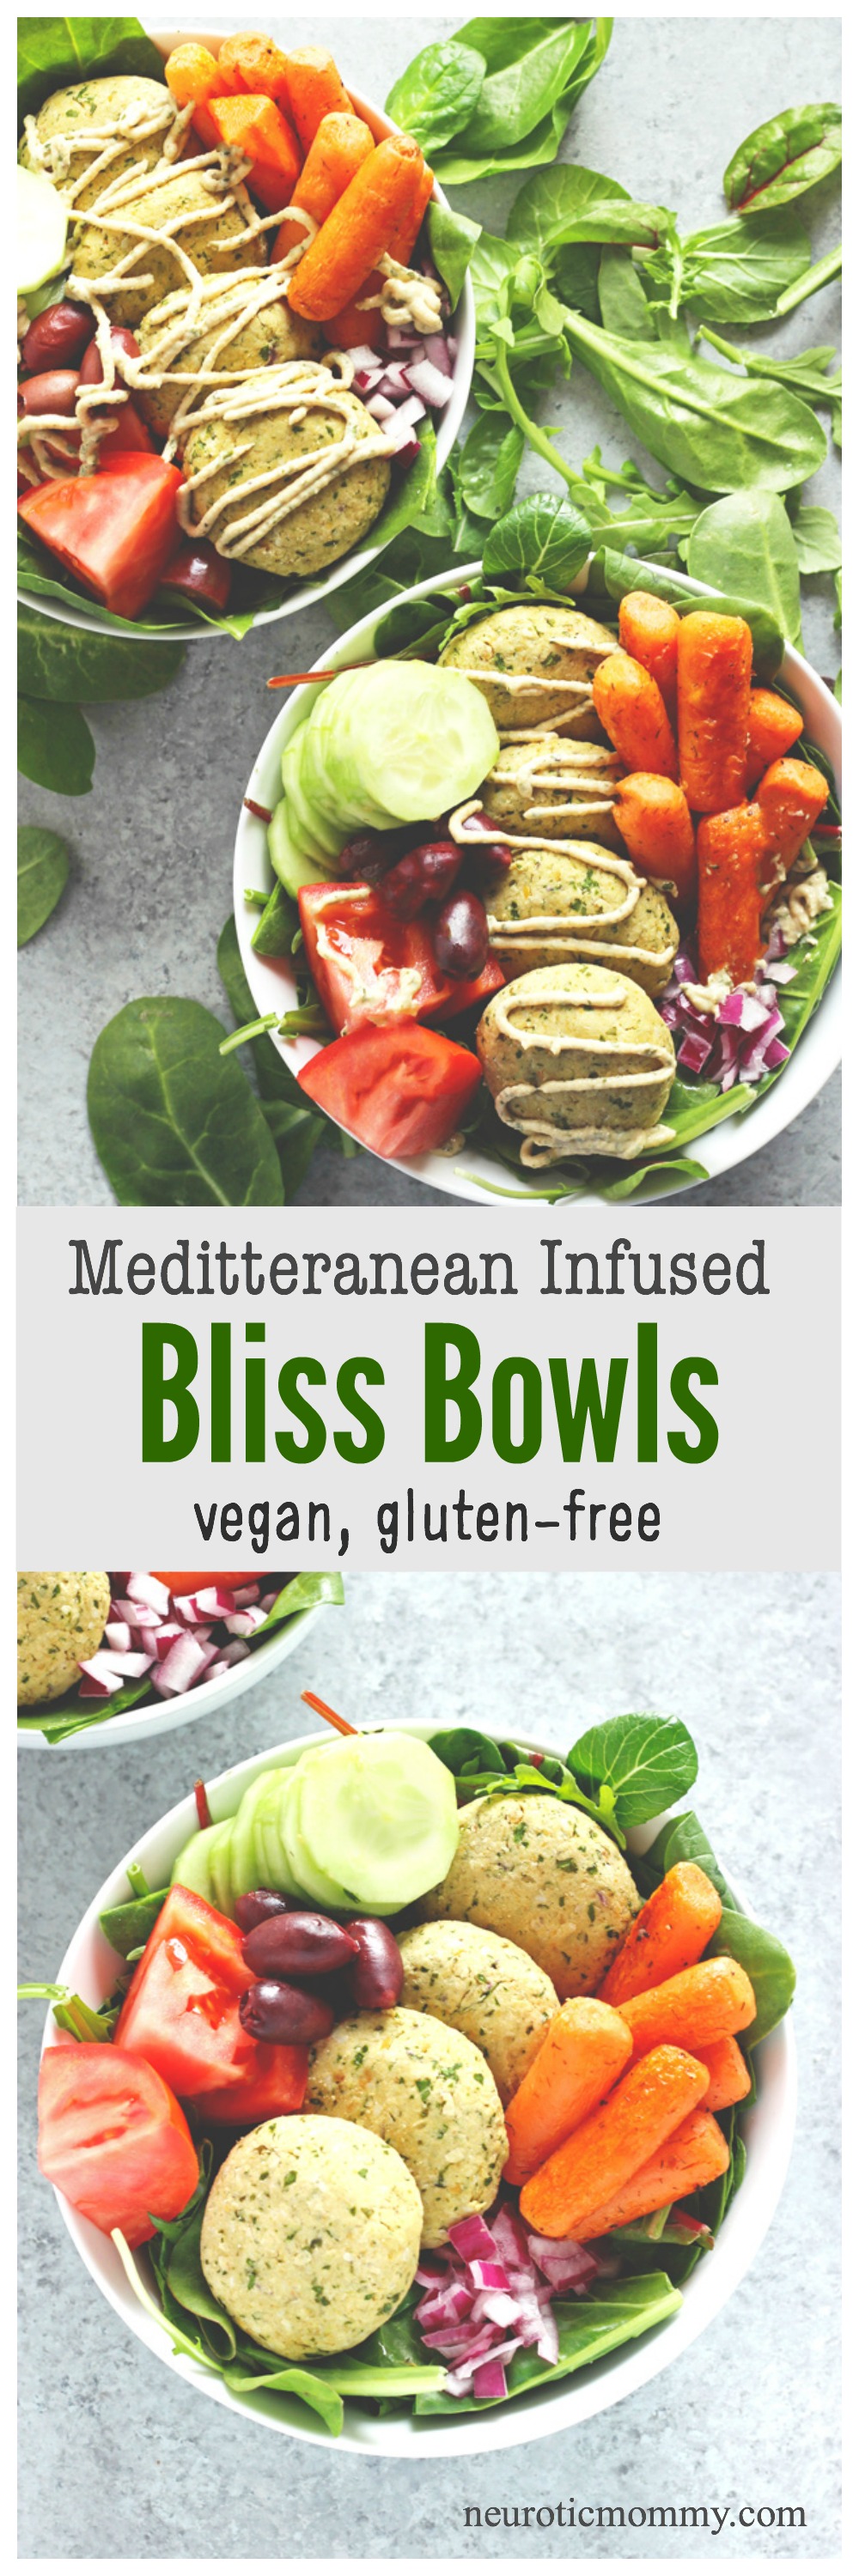 Mediterranean Infused Bliss Bowls - Delectable bowls loaded with falafel, leafy greens, roasted carrots, red onion, tomato, kalamata olives, and cucumbers. Perfectly filling, perfectly healthy. NeuroticMommy.com #vegan #healthy